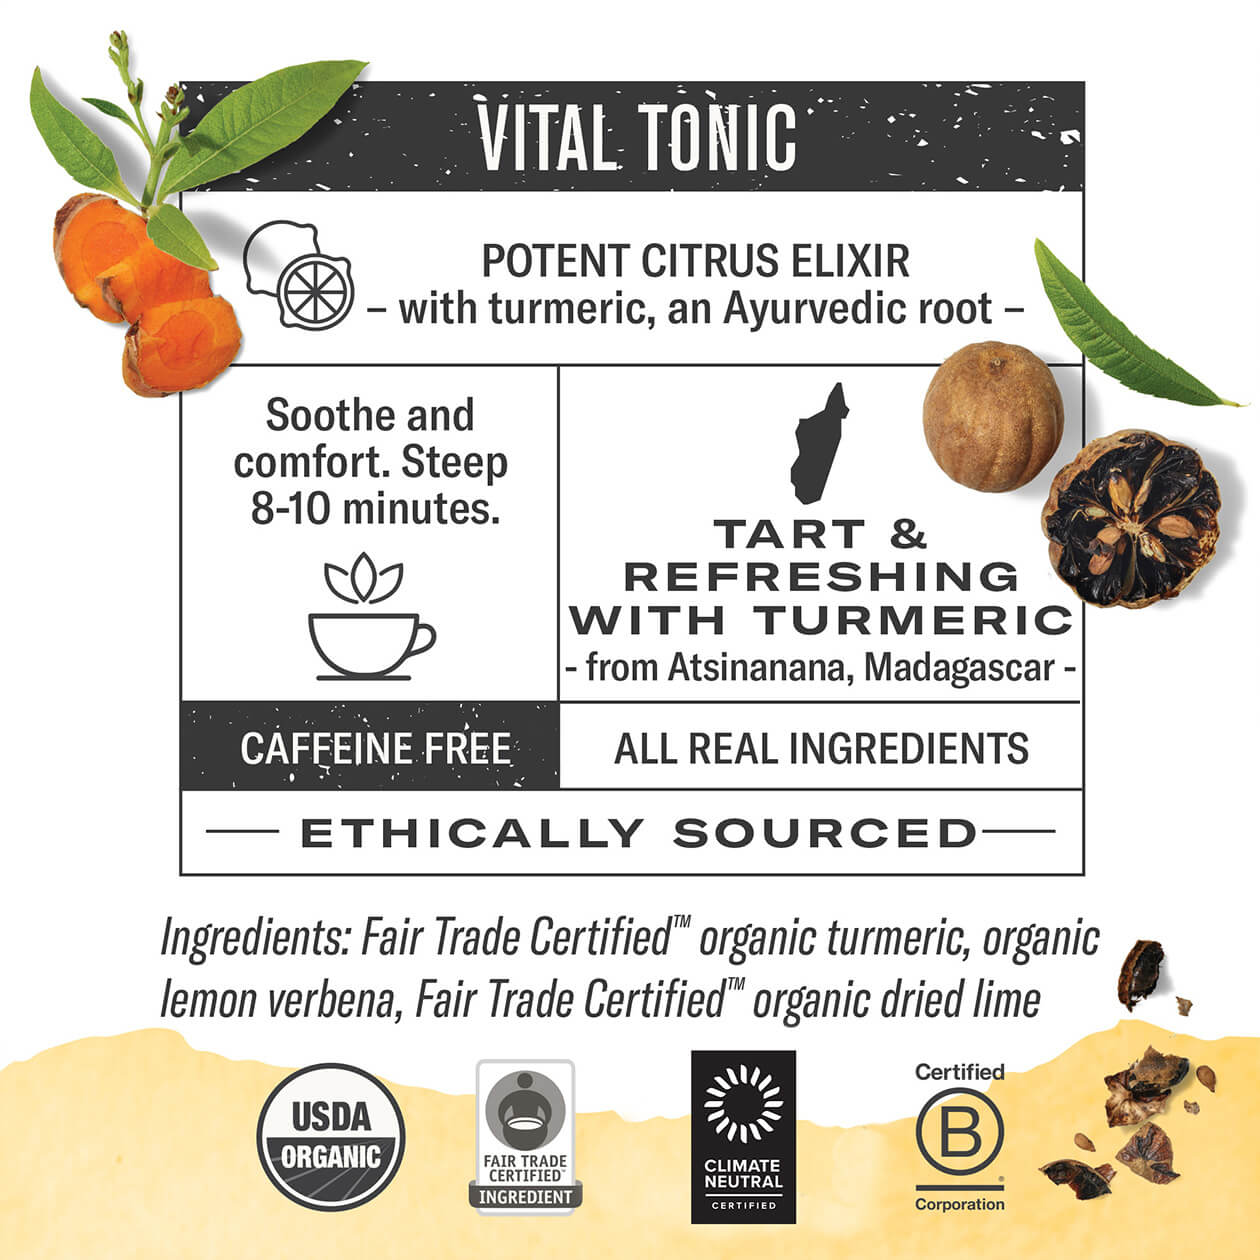 Infographic about Turmeric Golden Tonic: steep 8-10 minutes, origin: Madagascar, caffeine free, all real ingredients, ethically sourced